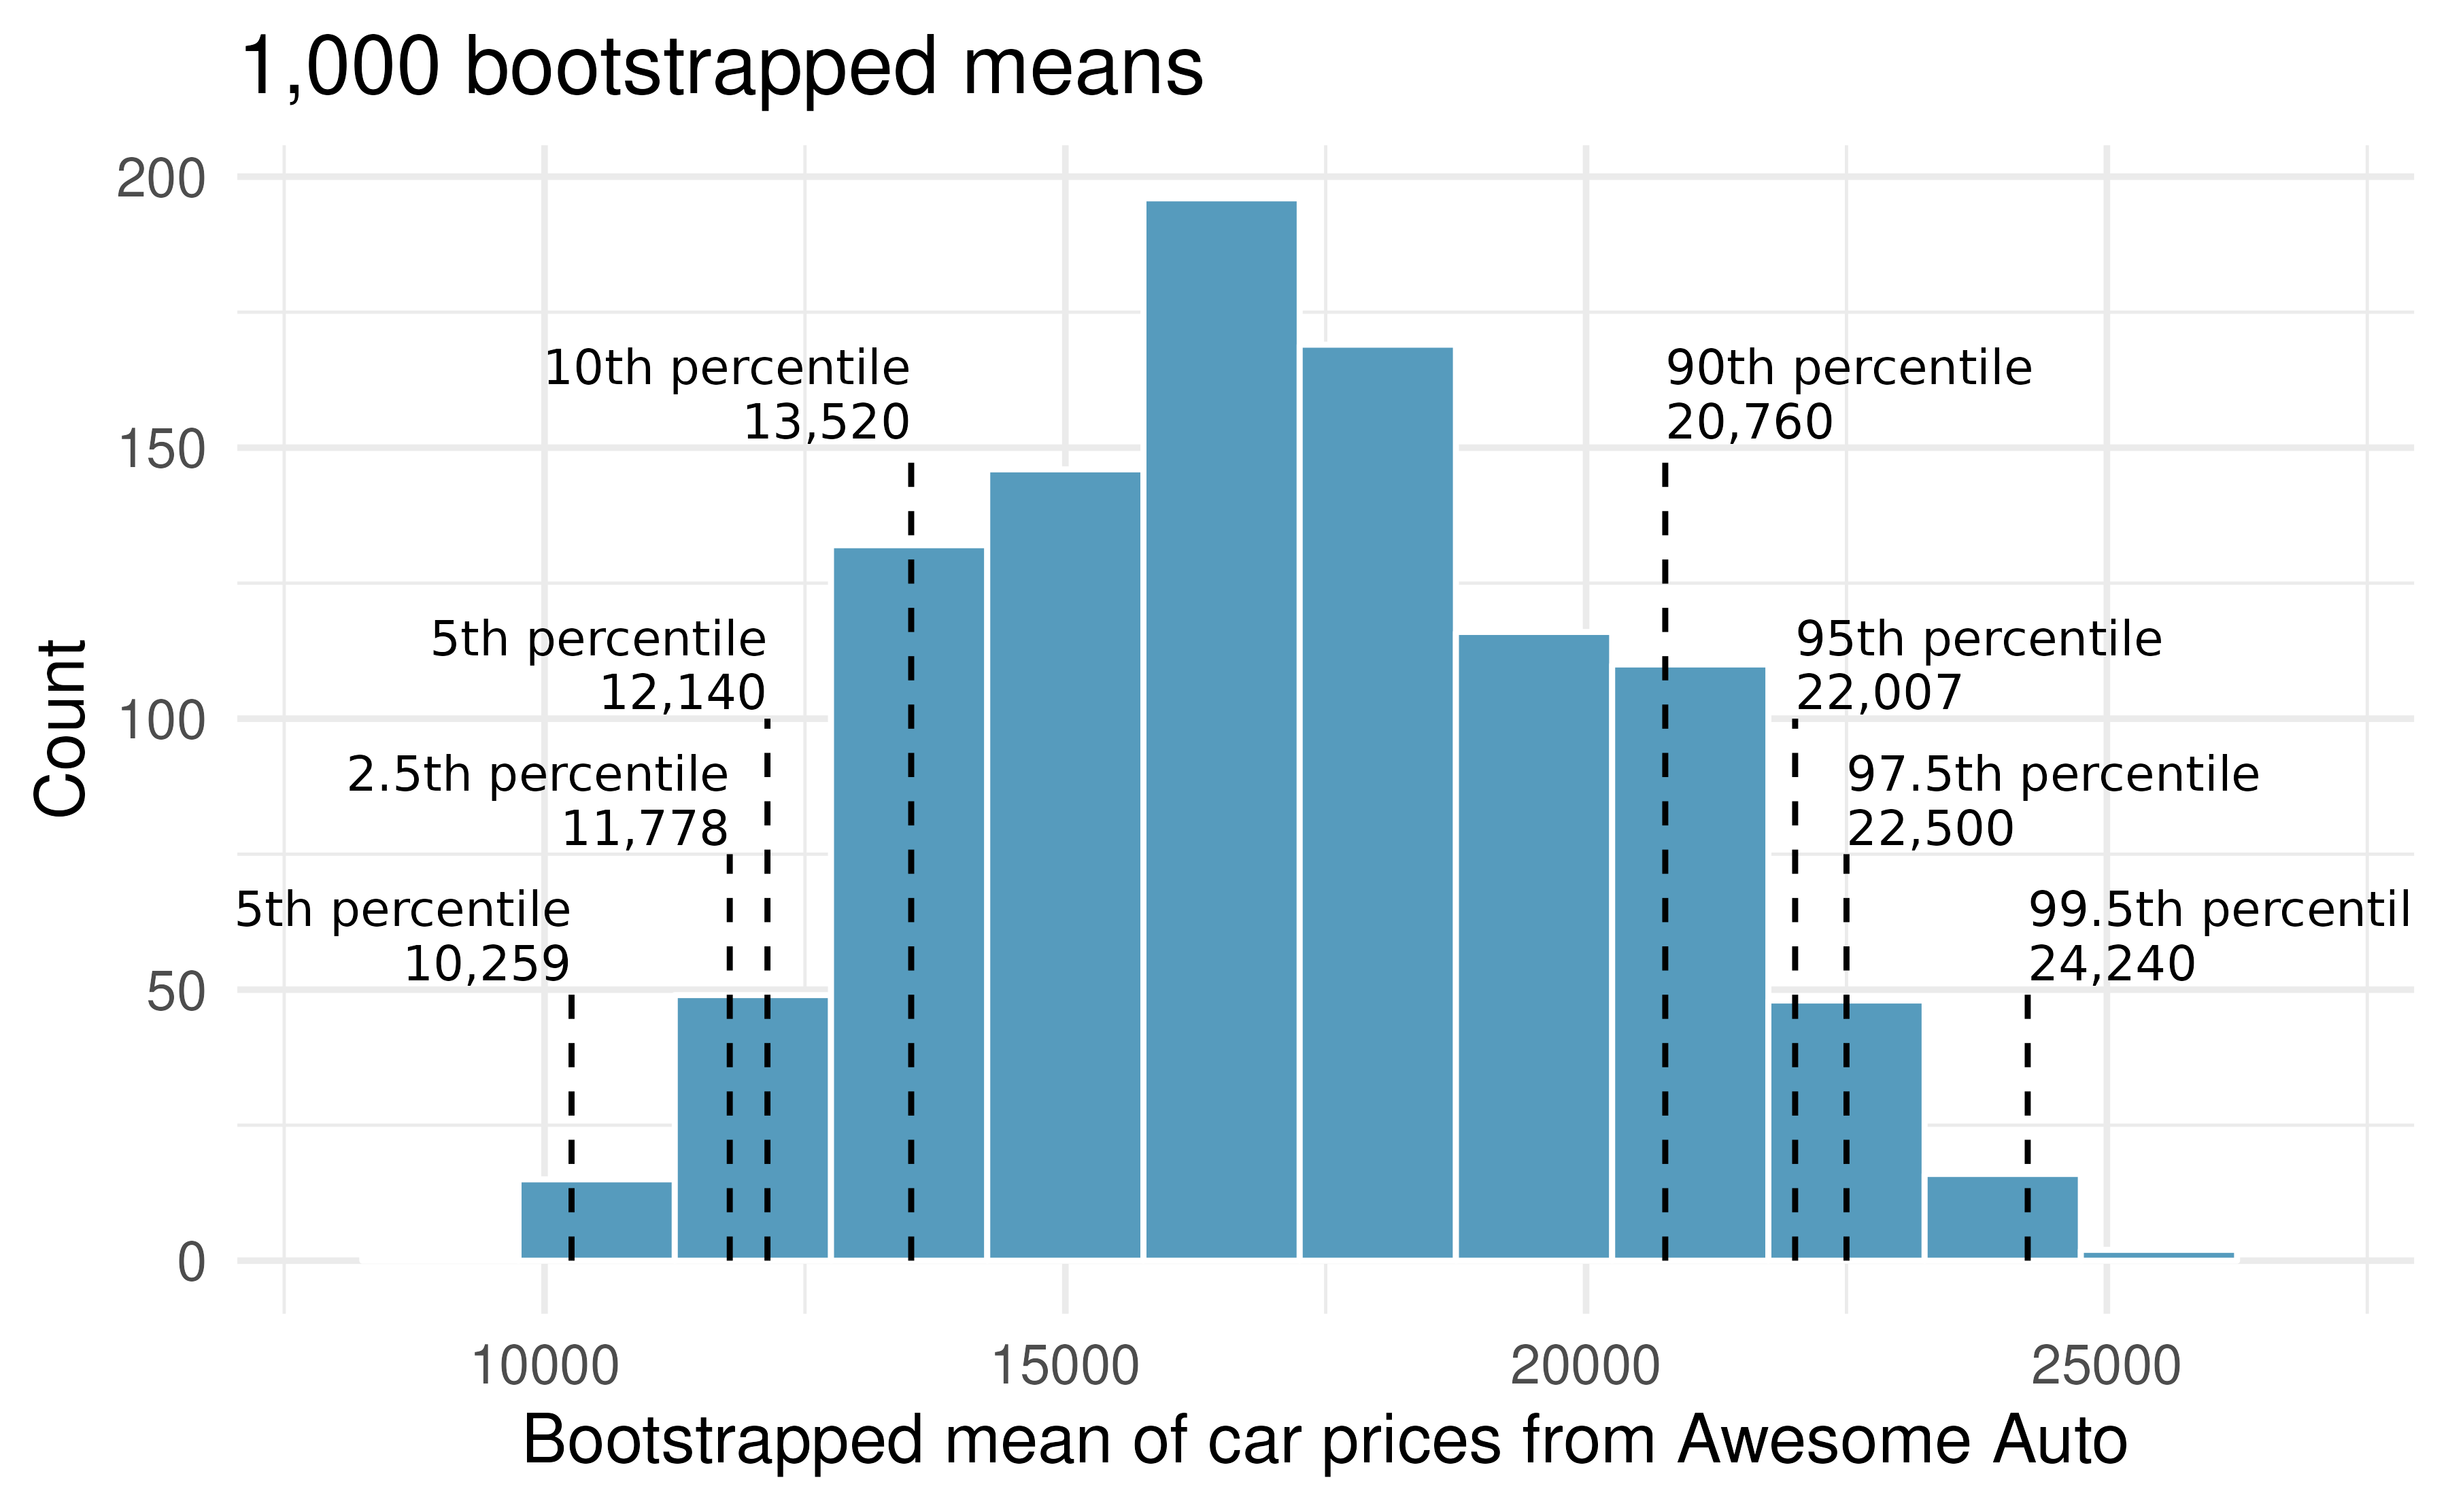 The original Awesome Auto data is bootstrapped 1,000 times. The histogram provides a sense for the variability of the average car price from sample to sample.